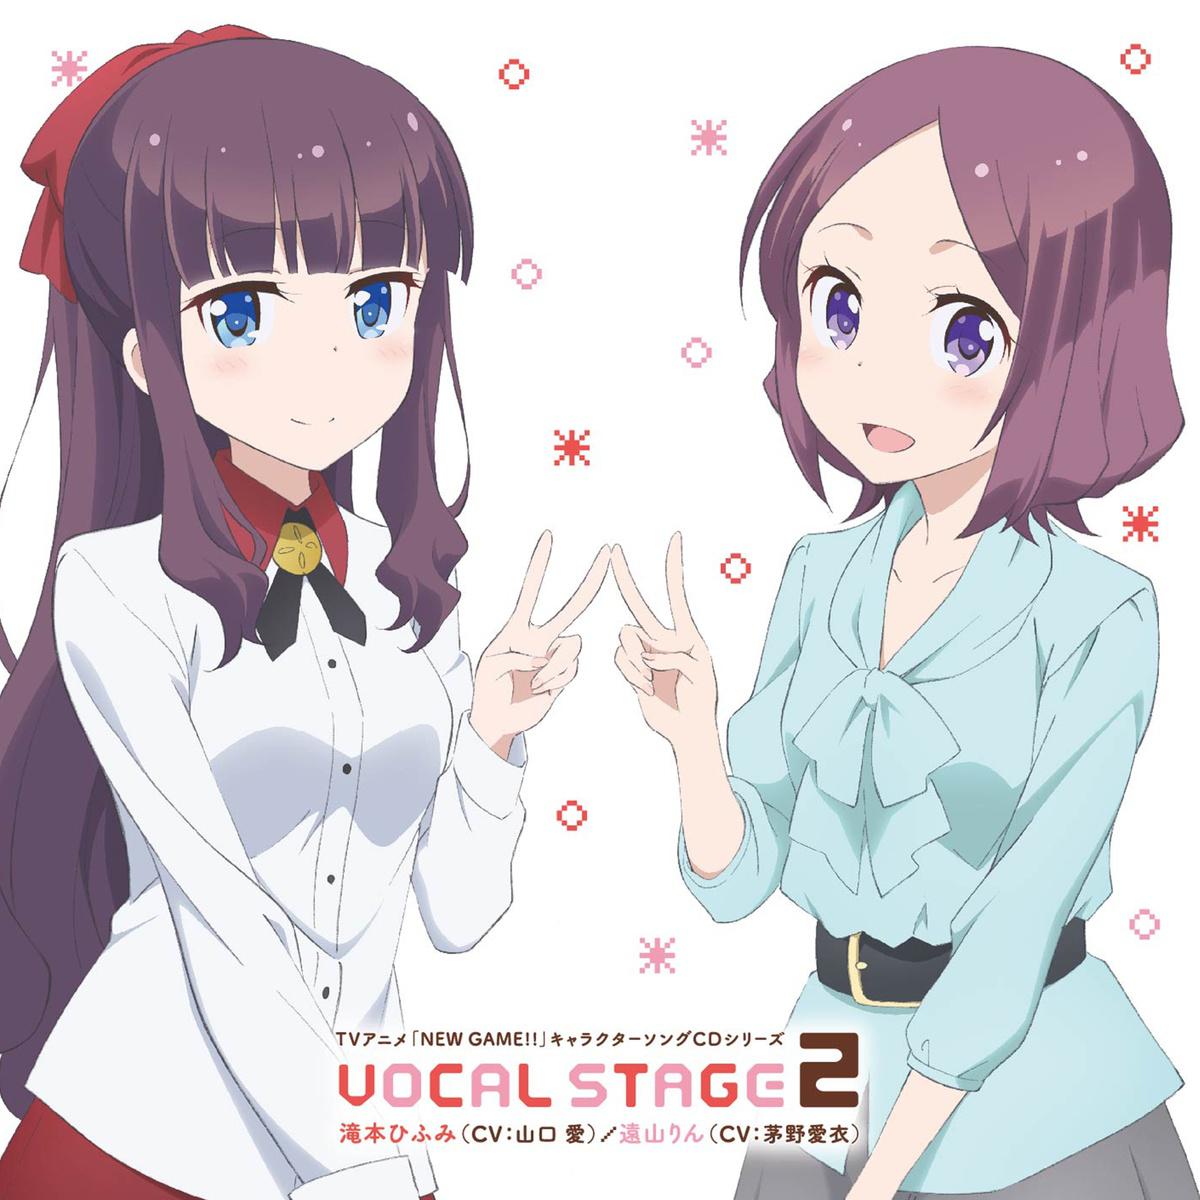 TV NEW GAME!! CD VOCAL STAGE 2